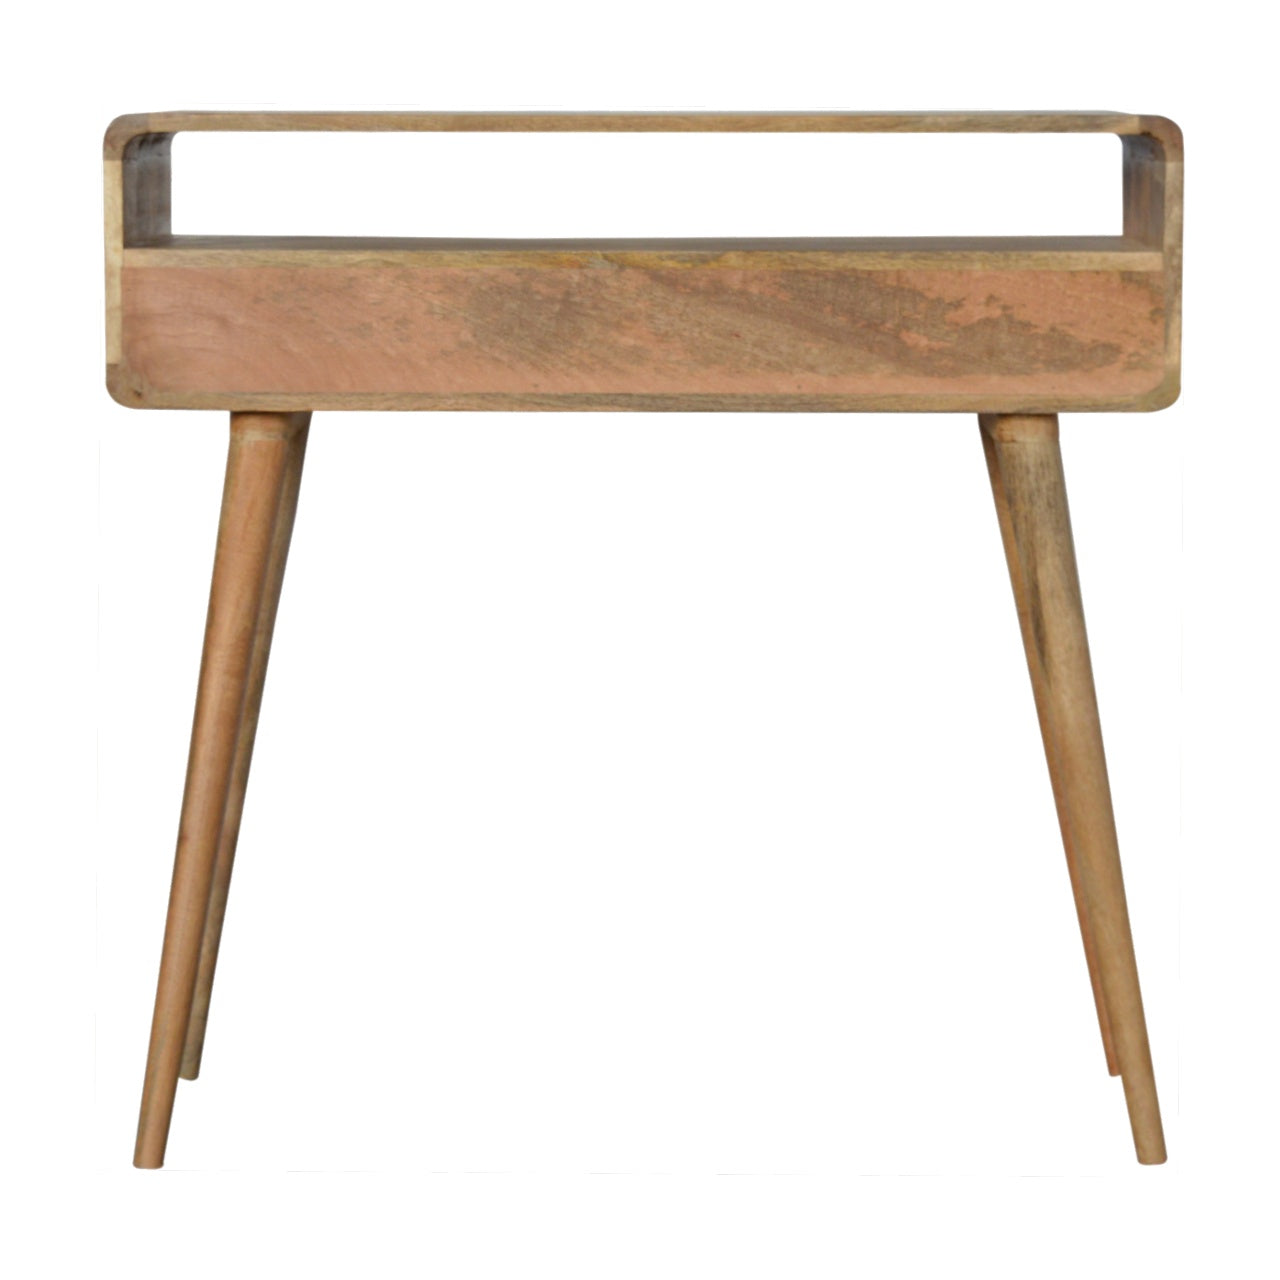 Modal handmade solid wood console table with drawers and open storage shelf in oak-ish finish | malletandplane.com